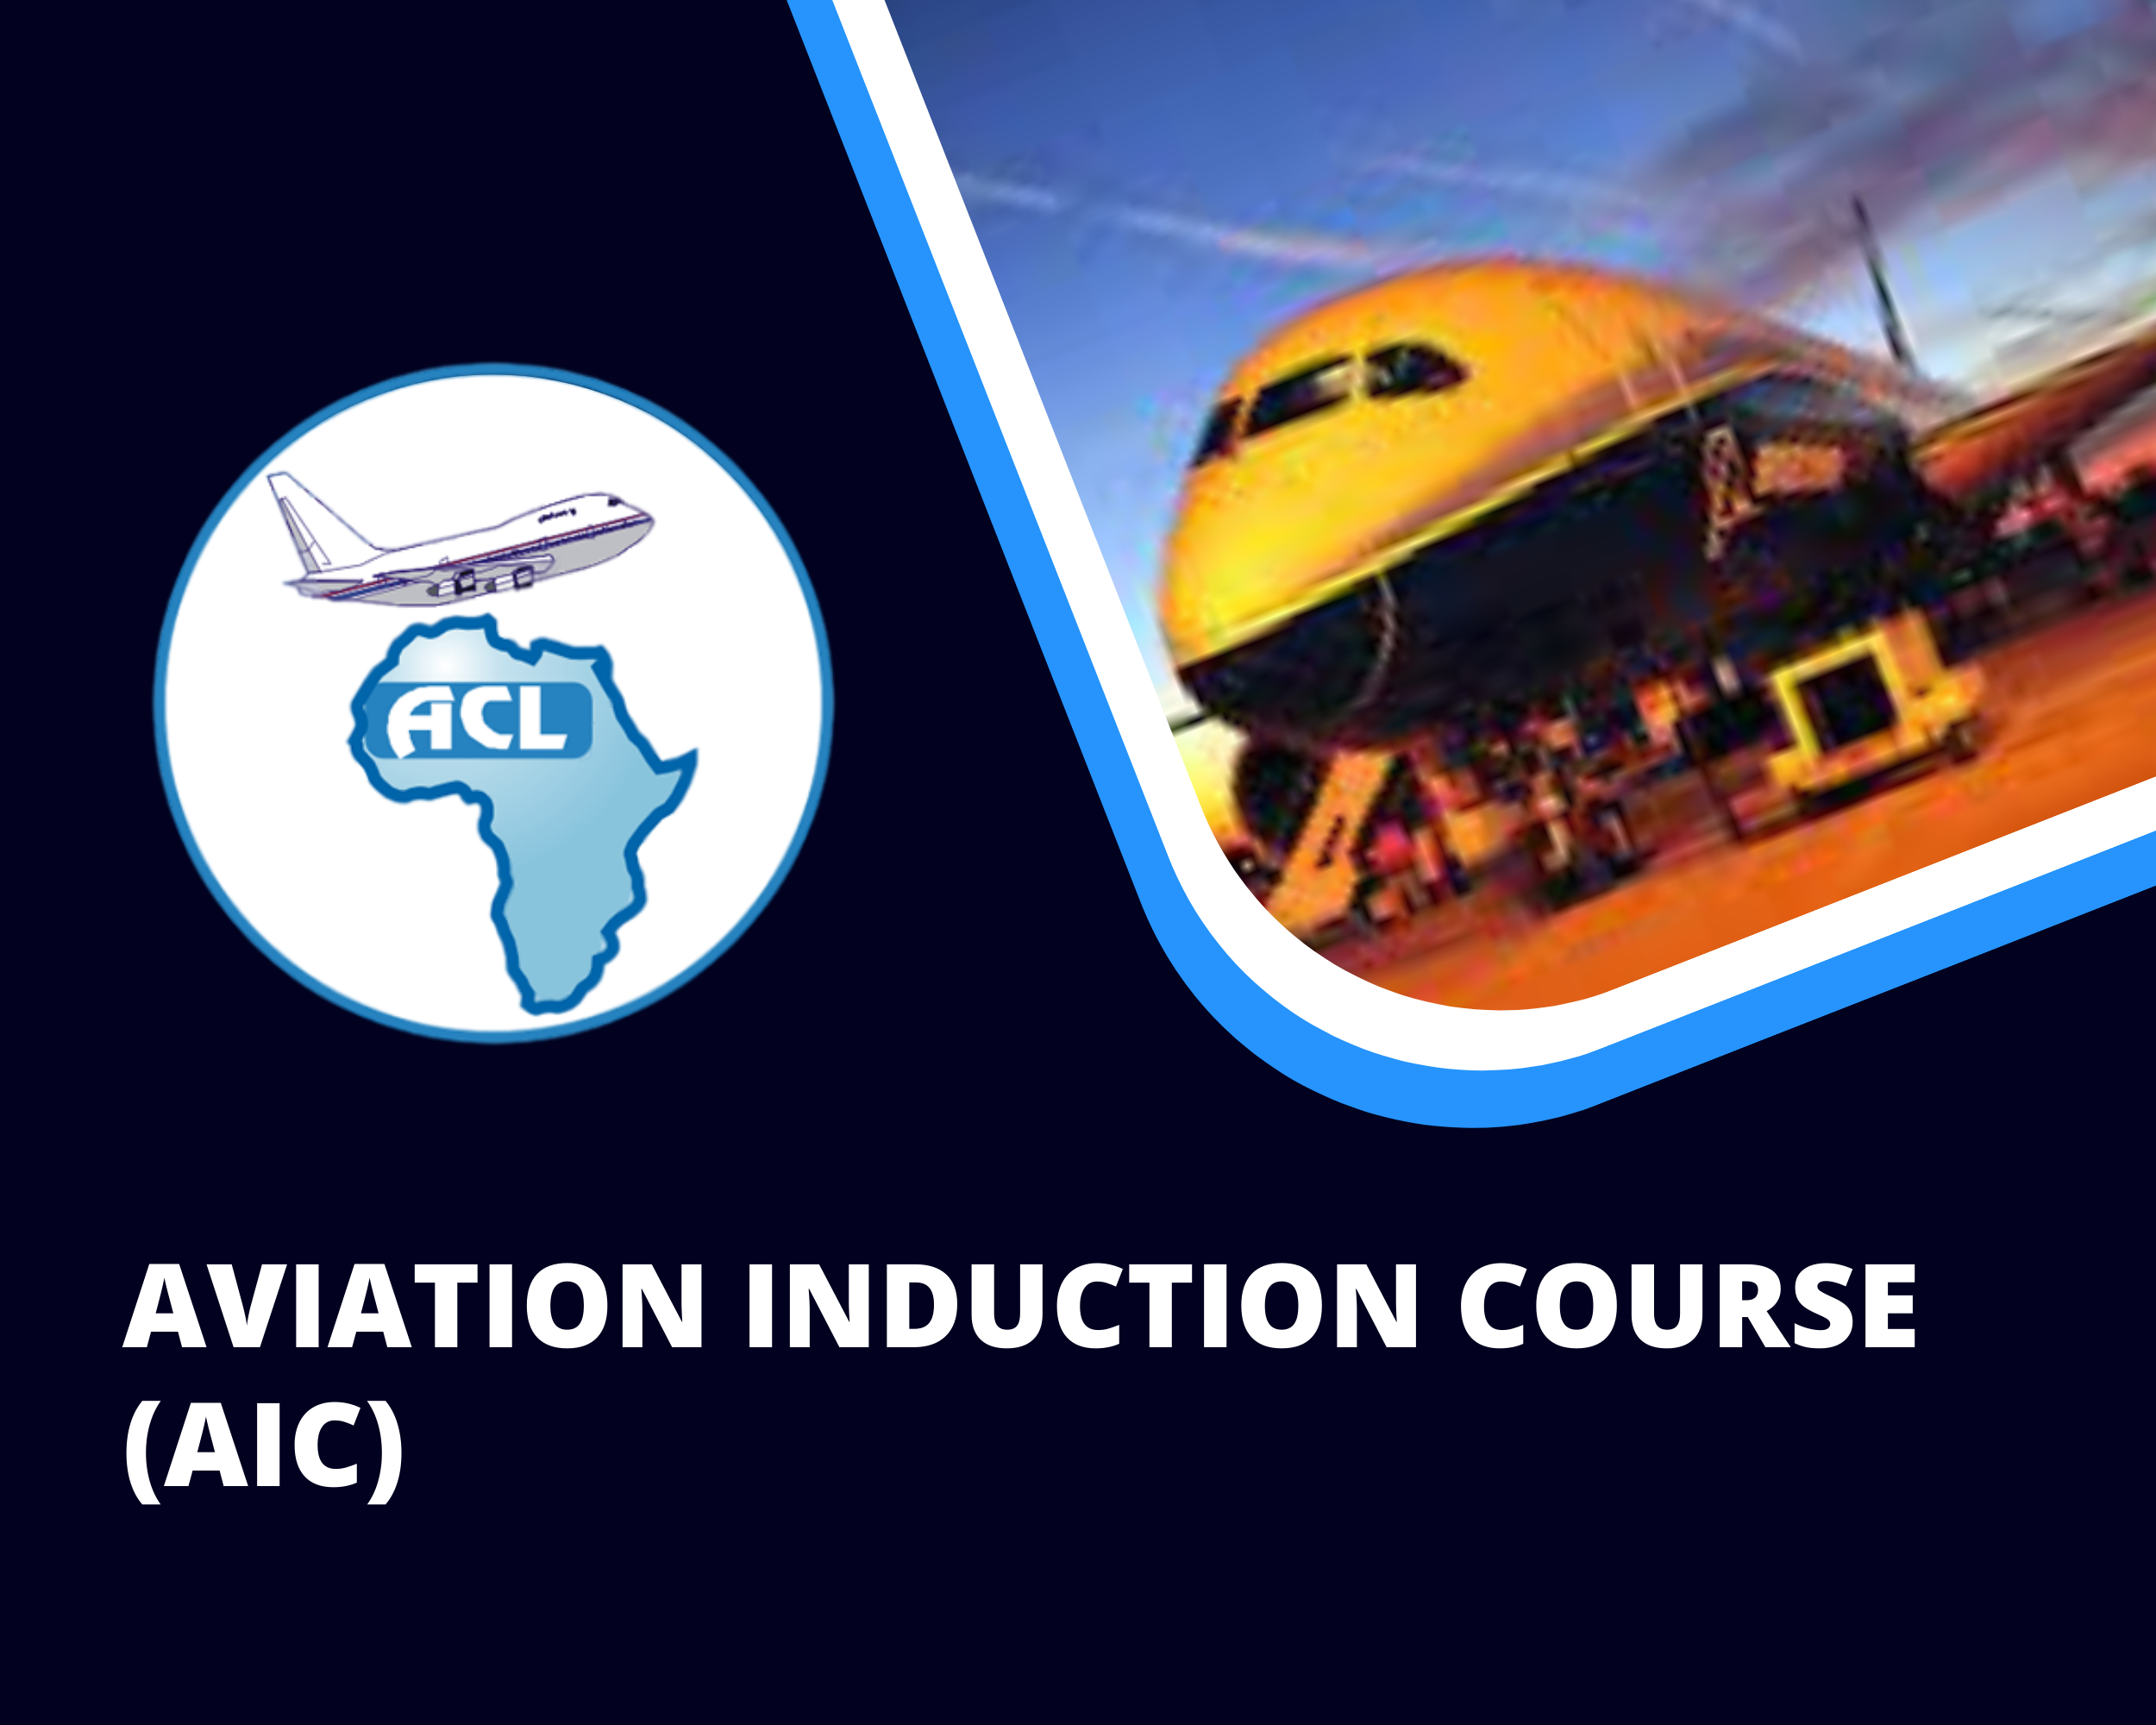 AVIATION INDUCTION COURSE (AIC)